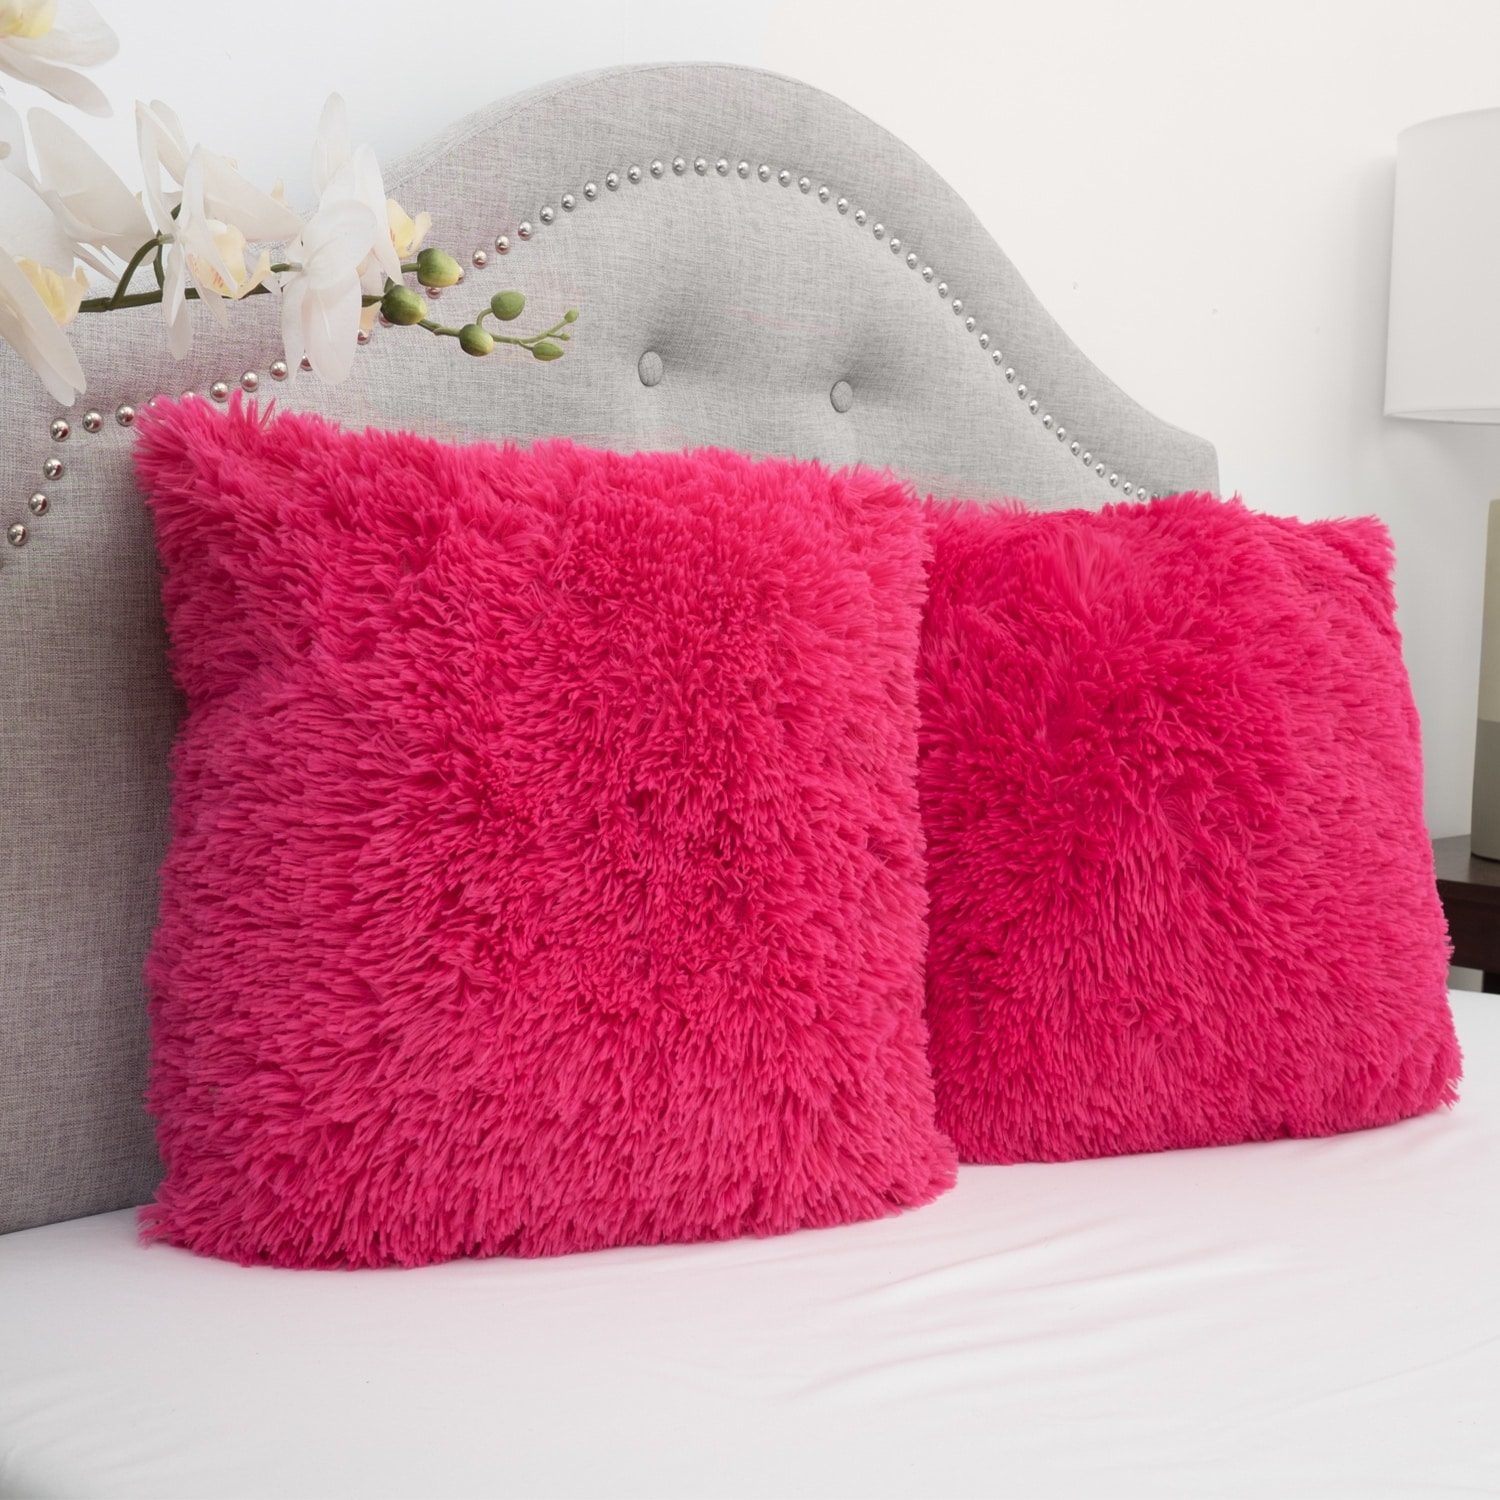 https://ak1.ostkcdn.com/images/products/is/images/direct/16201a1dcf685d4b119a03c31c81be9178367571/Colorful-Plush-2-Piece-Throw-Pillows-Set-%28Assorted-Colors%29.jpg